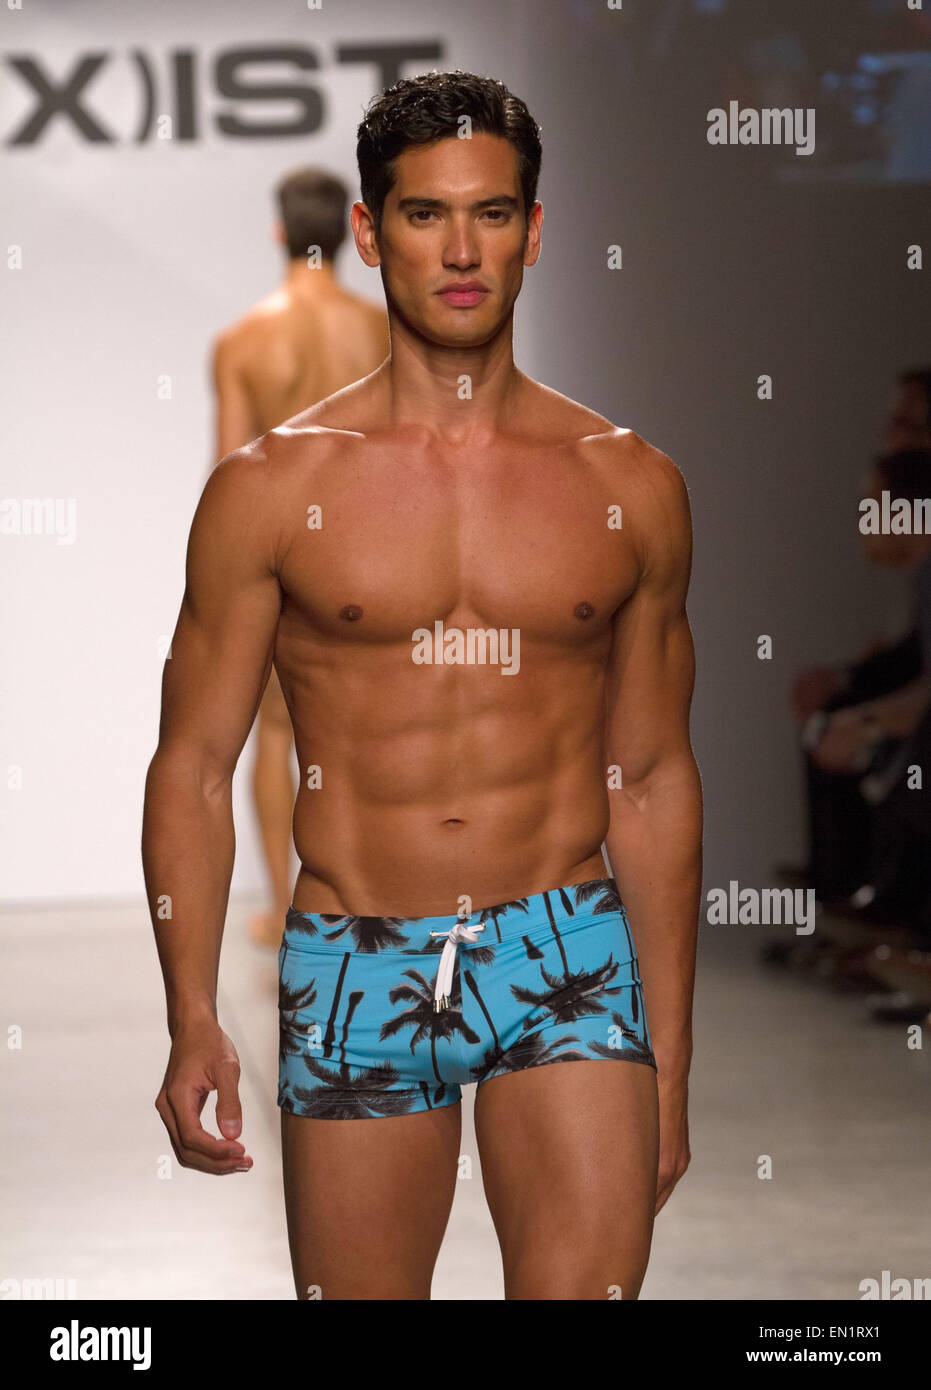 2(X)IST Men's Spring/Summer 2015 Runway Show held at Skylight Modern  Featuring: Model Where: New York City, New York, United States When: 21 Oct 2014 Stock Photo